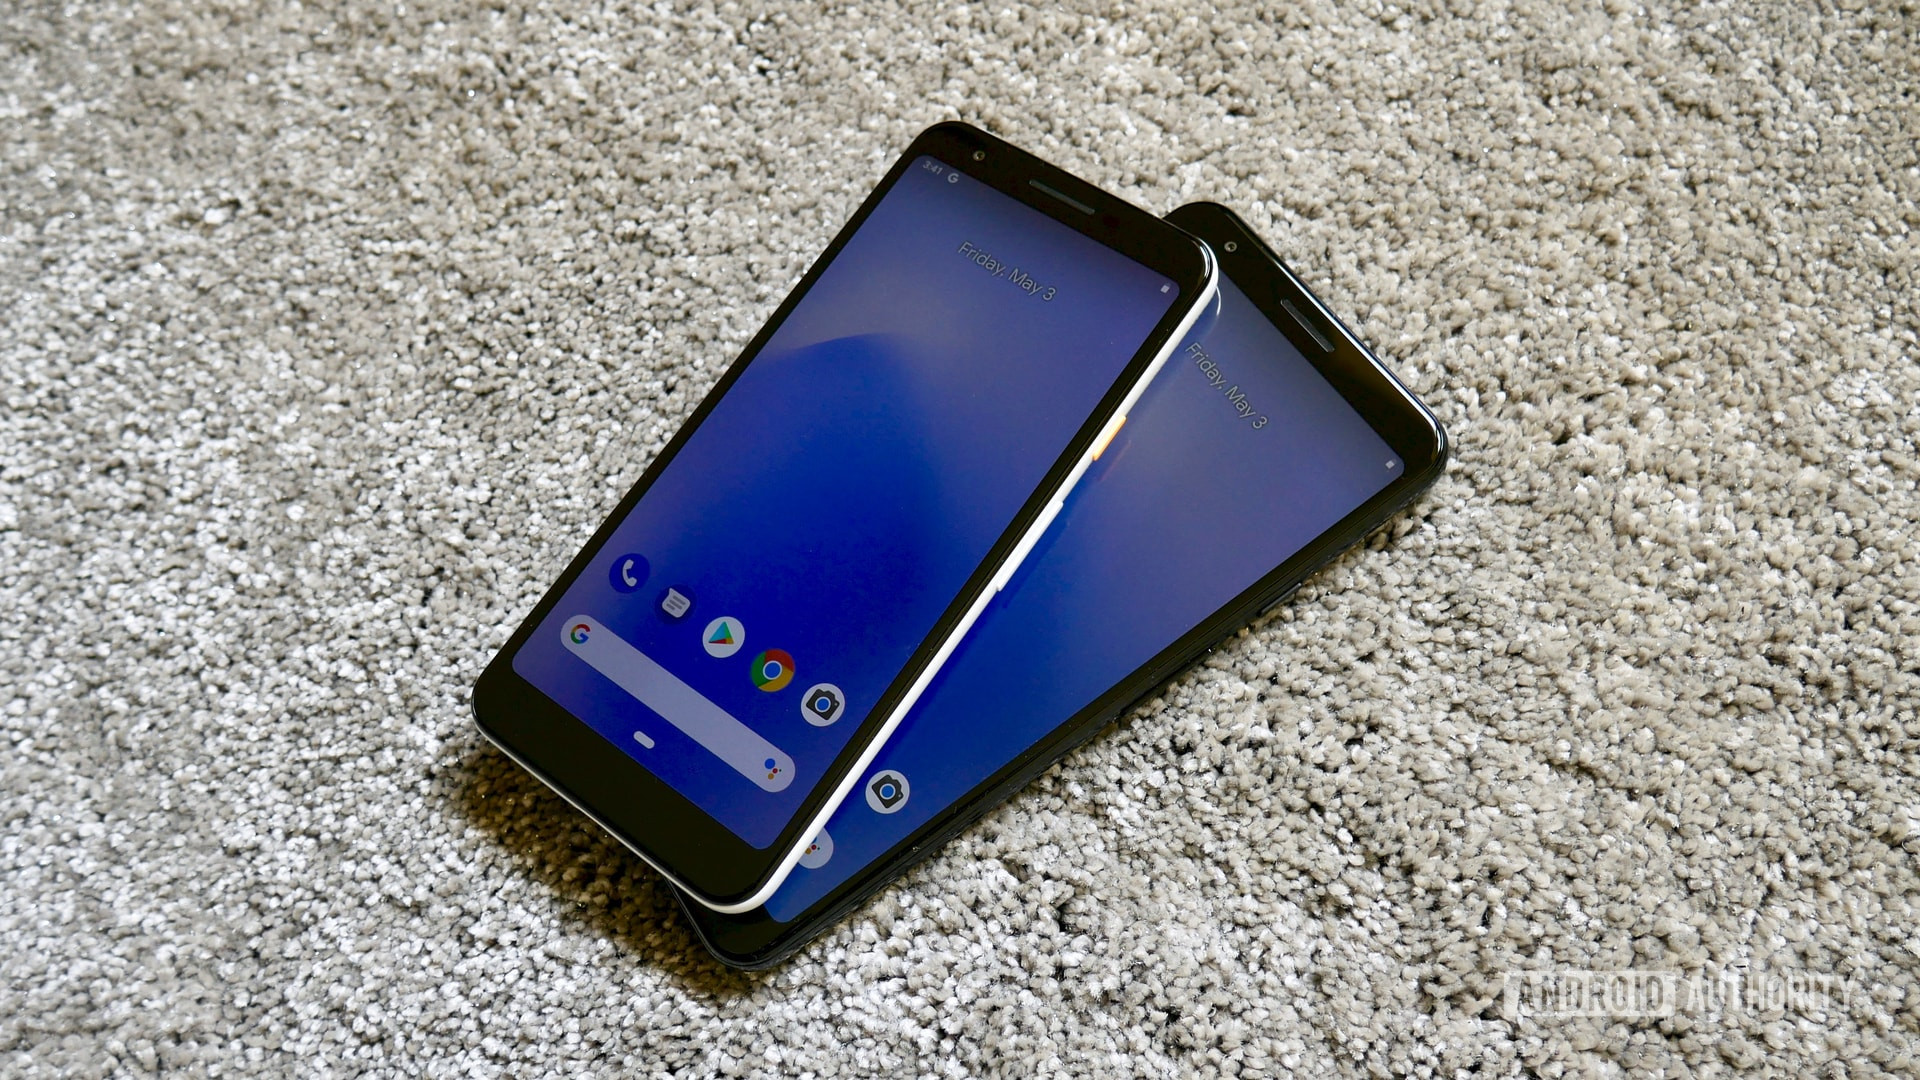 Pixel 3 Gibbon Themes: How To Get The Pixel 3 Look